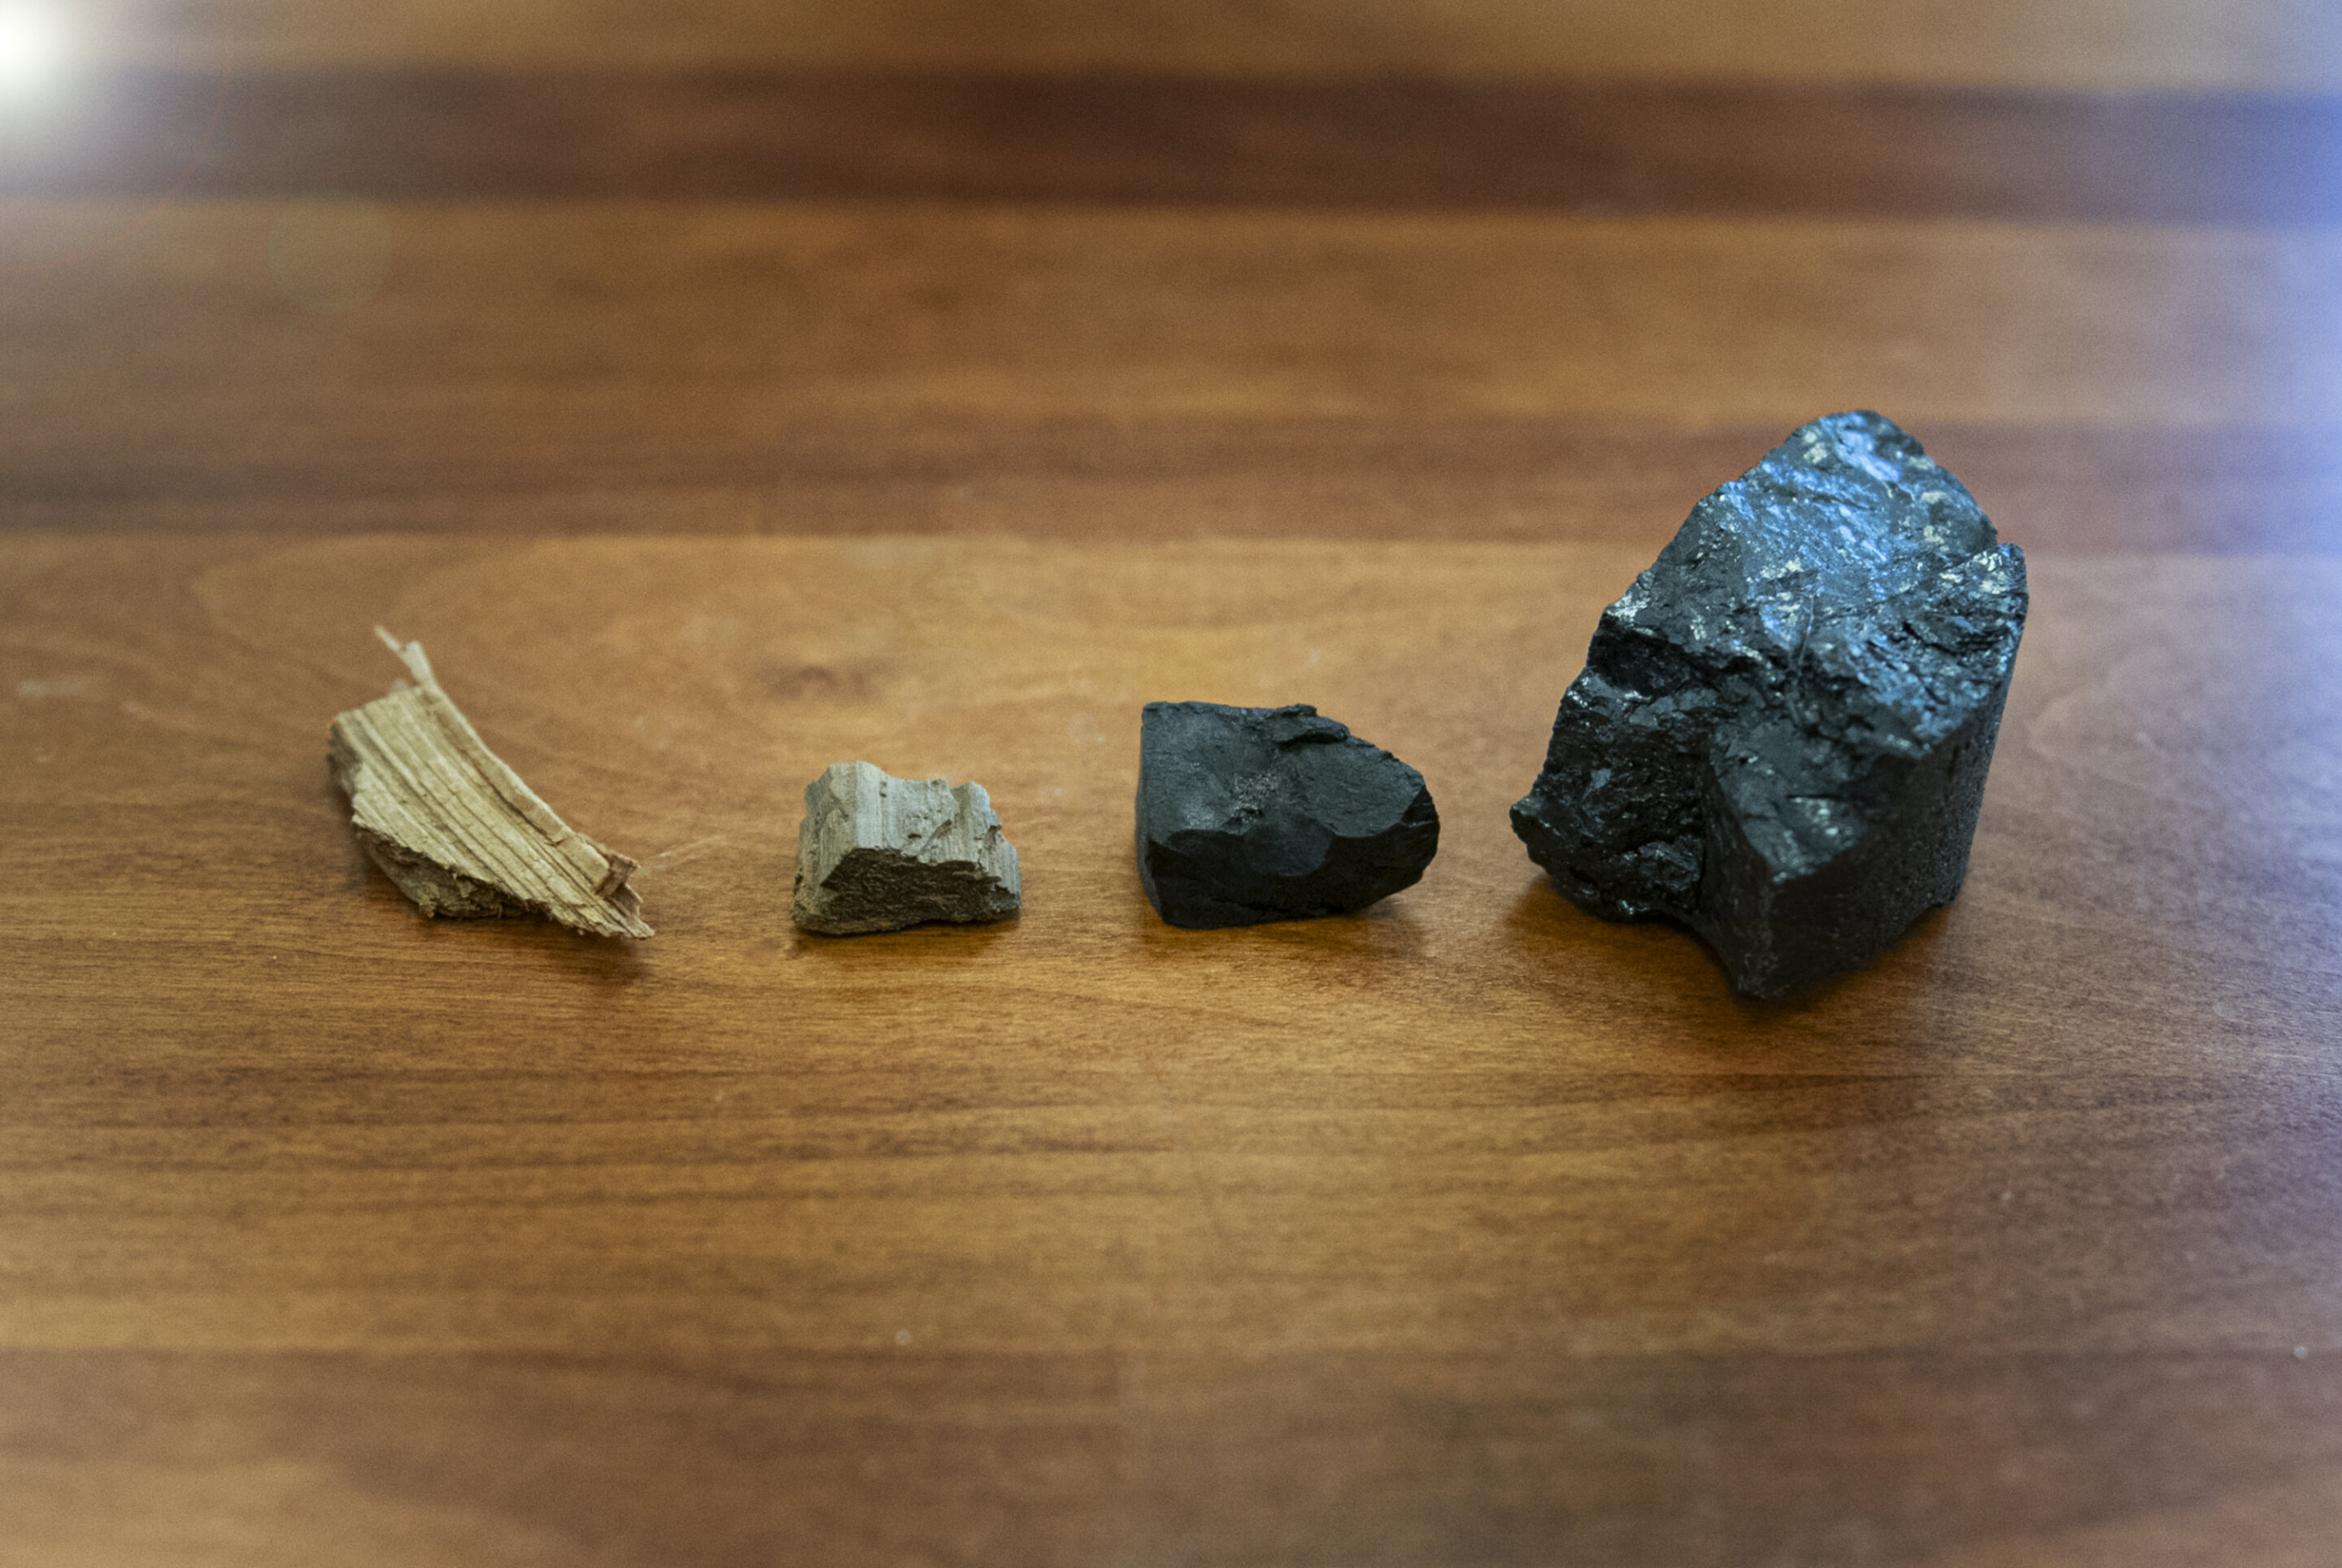 Coal creation mechanism uncovered